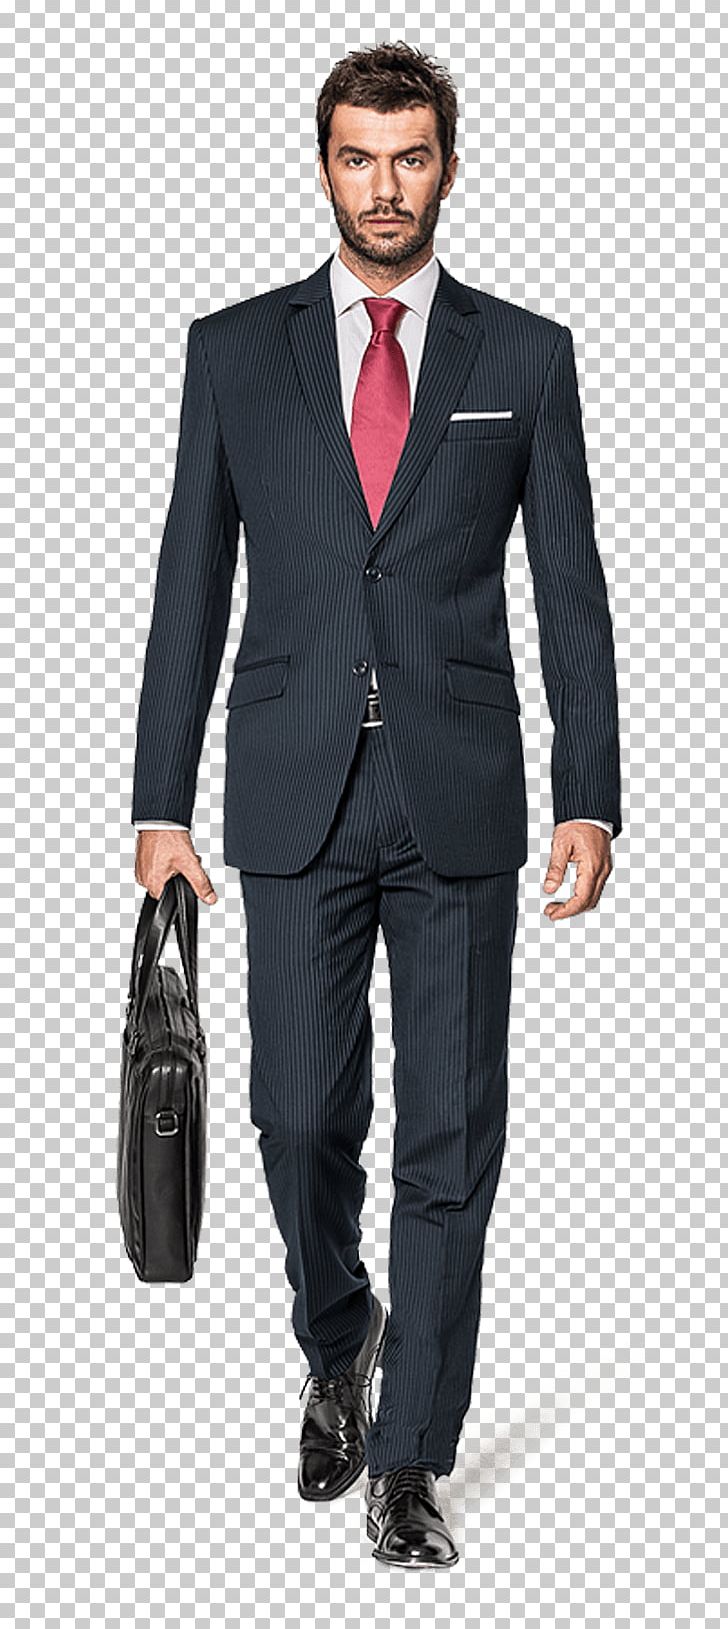 Suit Clothing Fashion PNG, Clipart, Blazer, Business, Business Executive, Businessperson, Cashmere Wool Free PNG Download